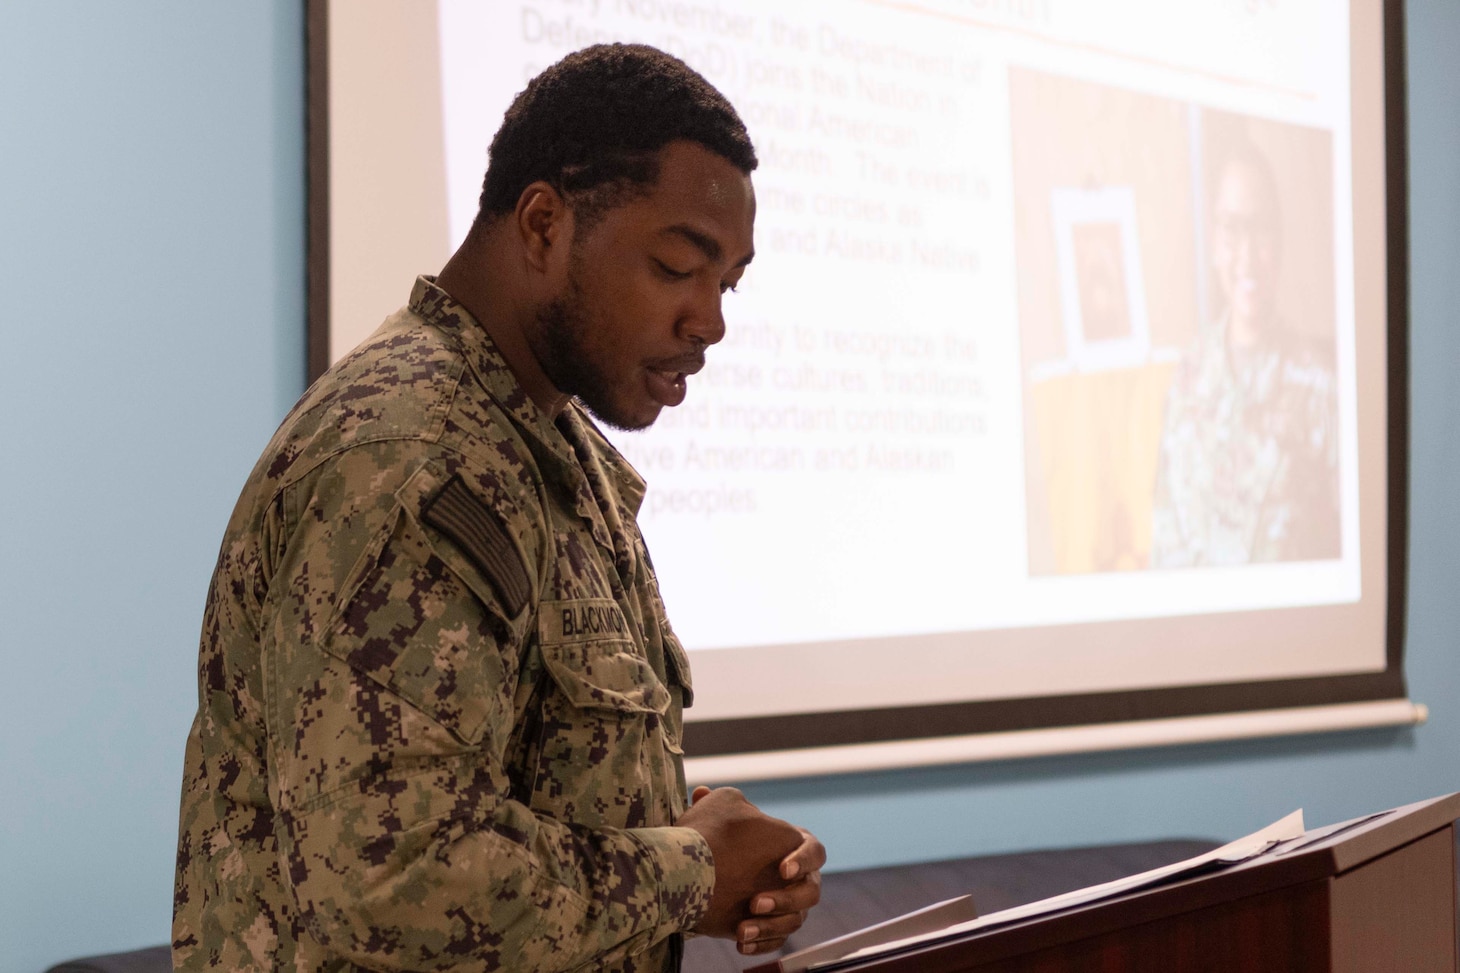 Machinist’s Mate Fireman Sedravius Blackmon, assigned to Naval Support Activity  Souda Bay, welcomes the audience as the master of ceremonies during a National American Indian Heritage Month event sponsored by the NSA Souda Bay Multicultural Heritage Committee on Nov. 30, 2023.